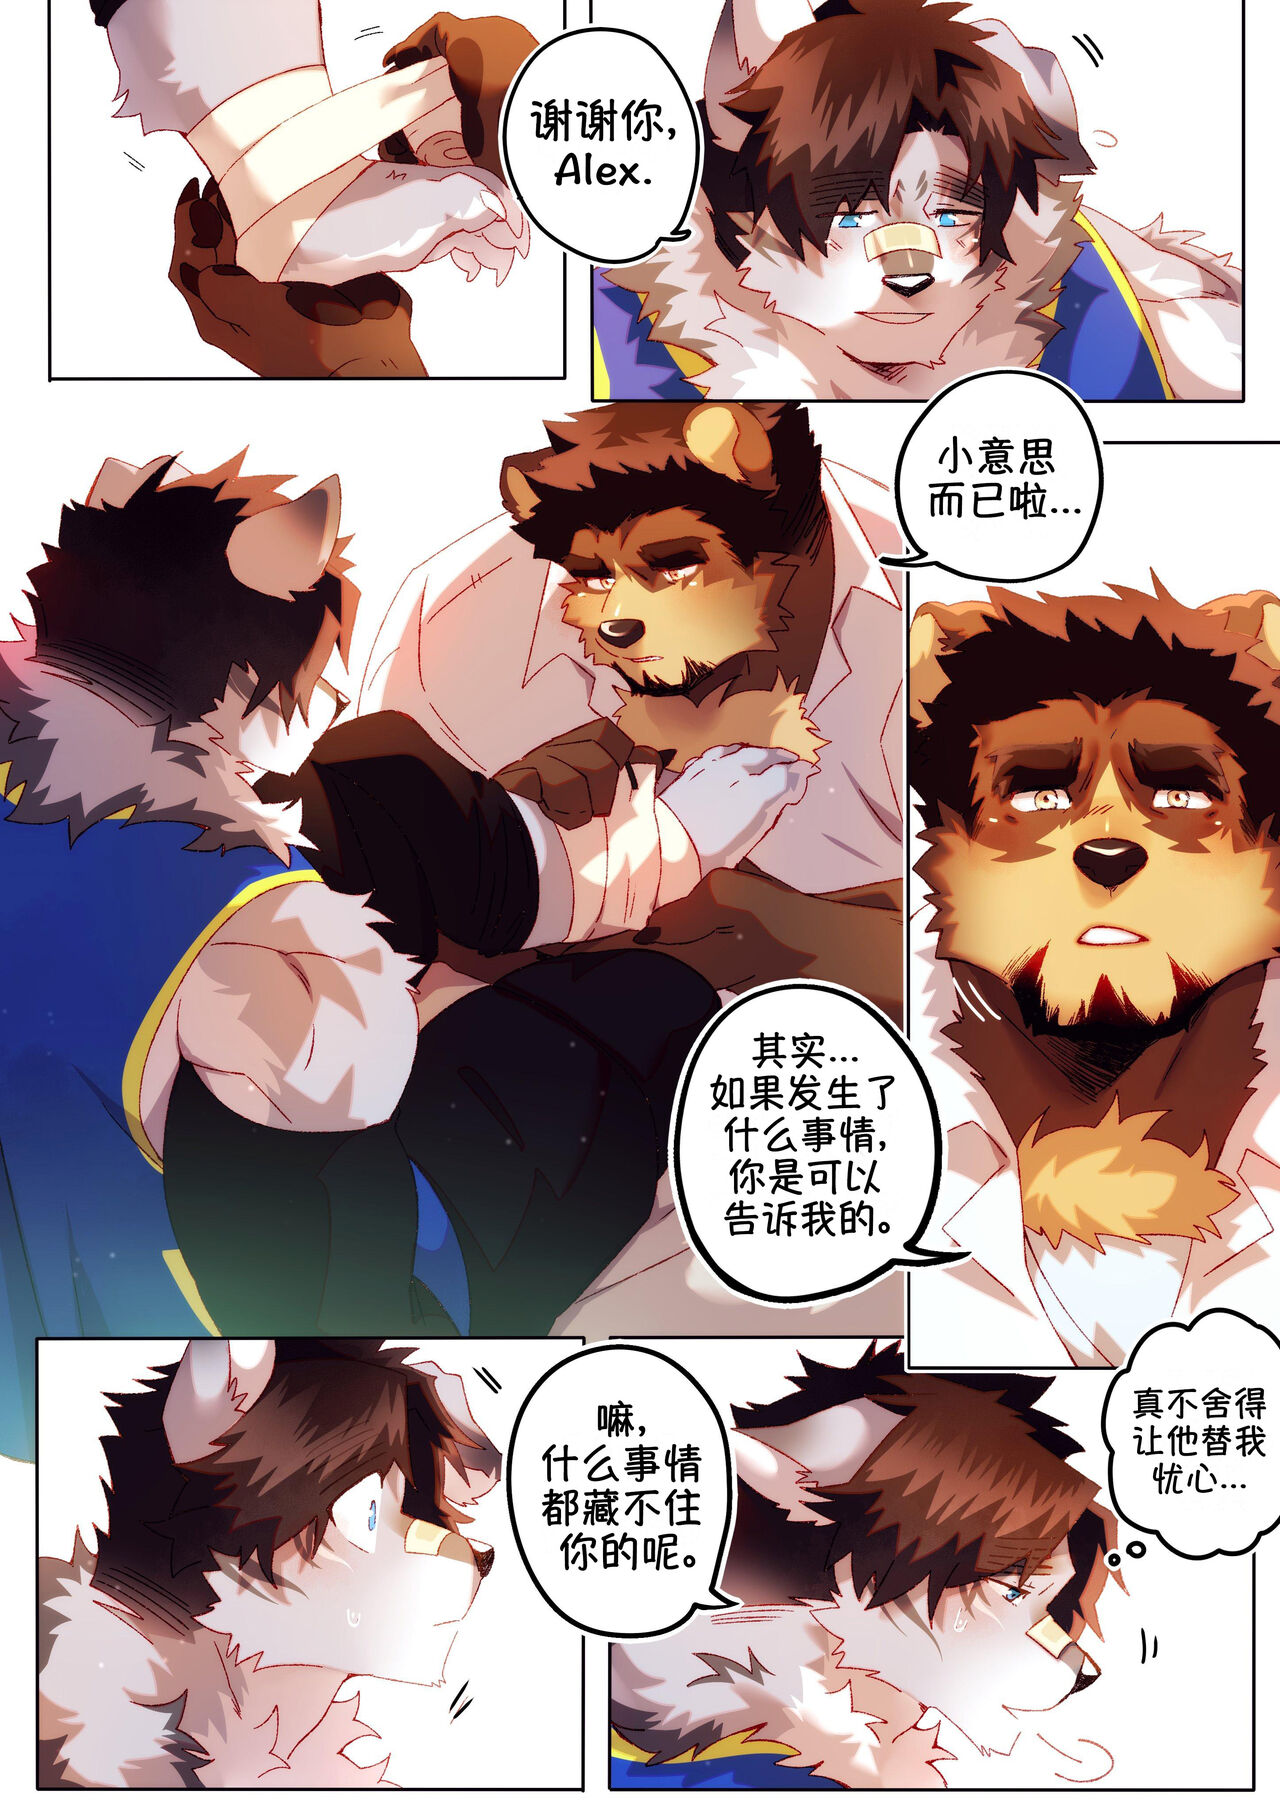 [BooBoo] Passionate Affection 深挚 [Chinese Ver.]  Ongoing 